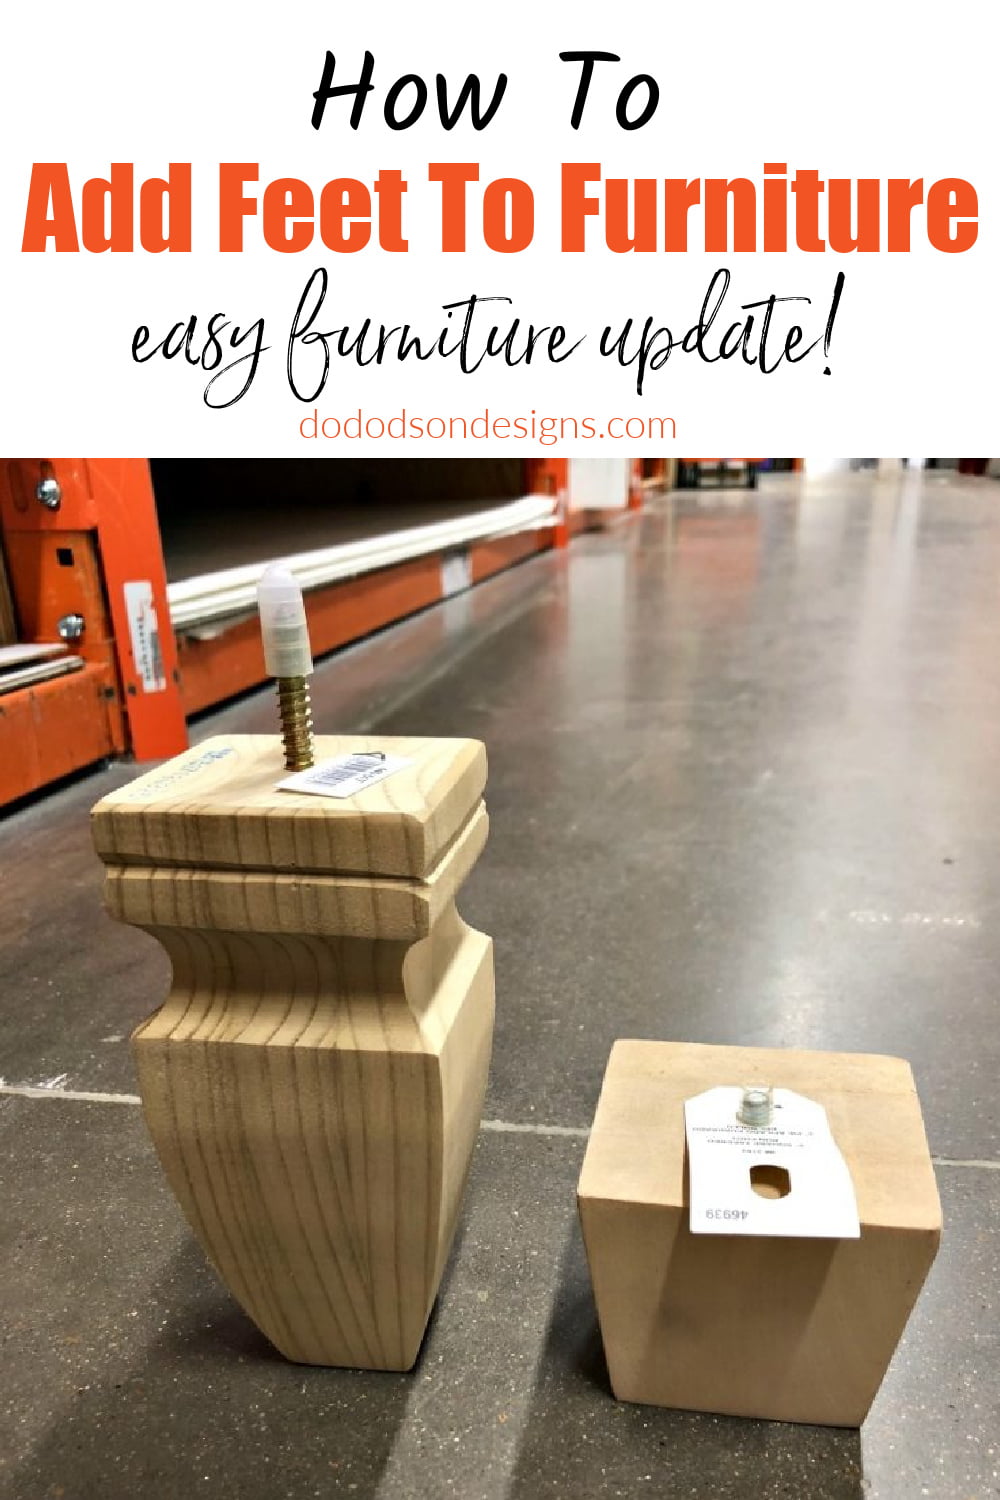 How I Made Furniture Feet With Wood Finials - Do Dodson Designs